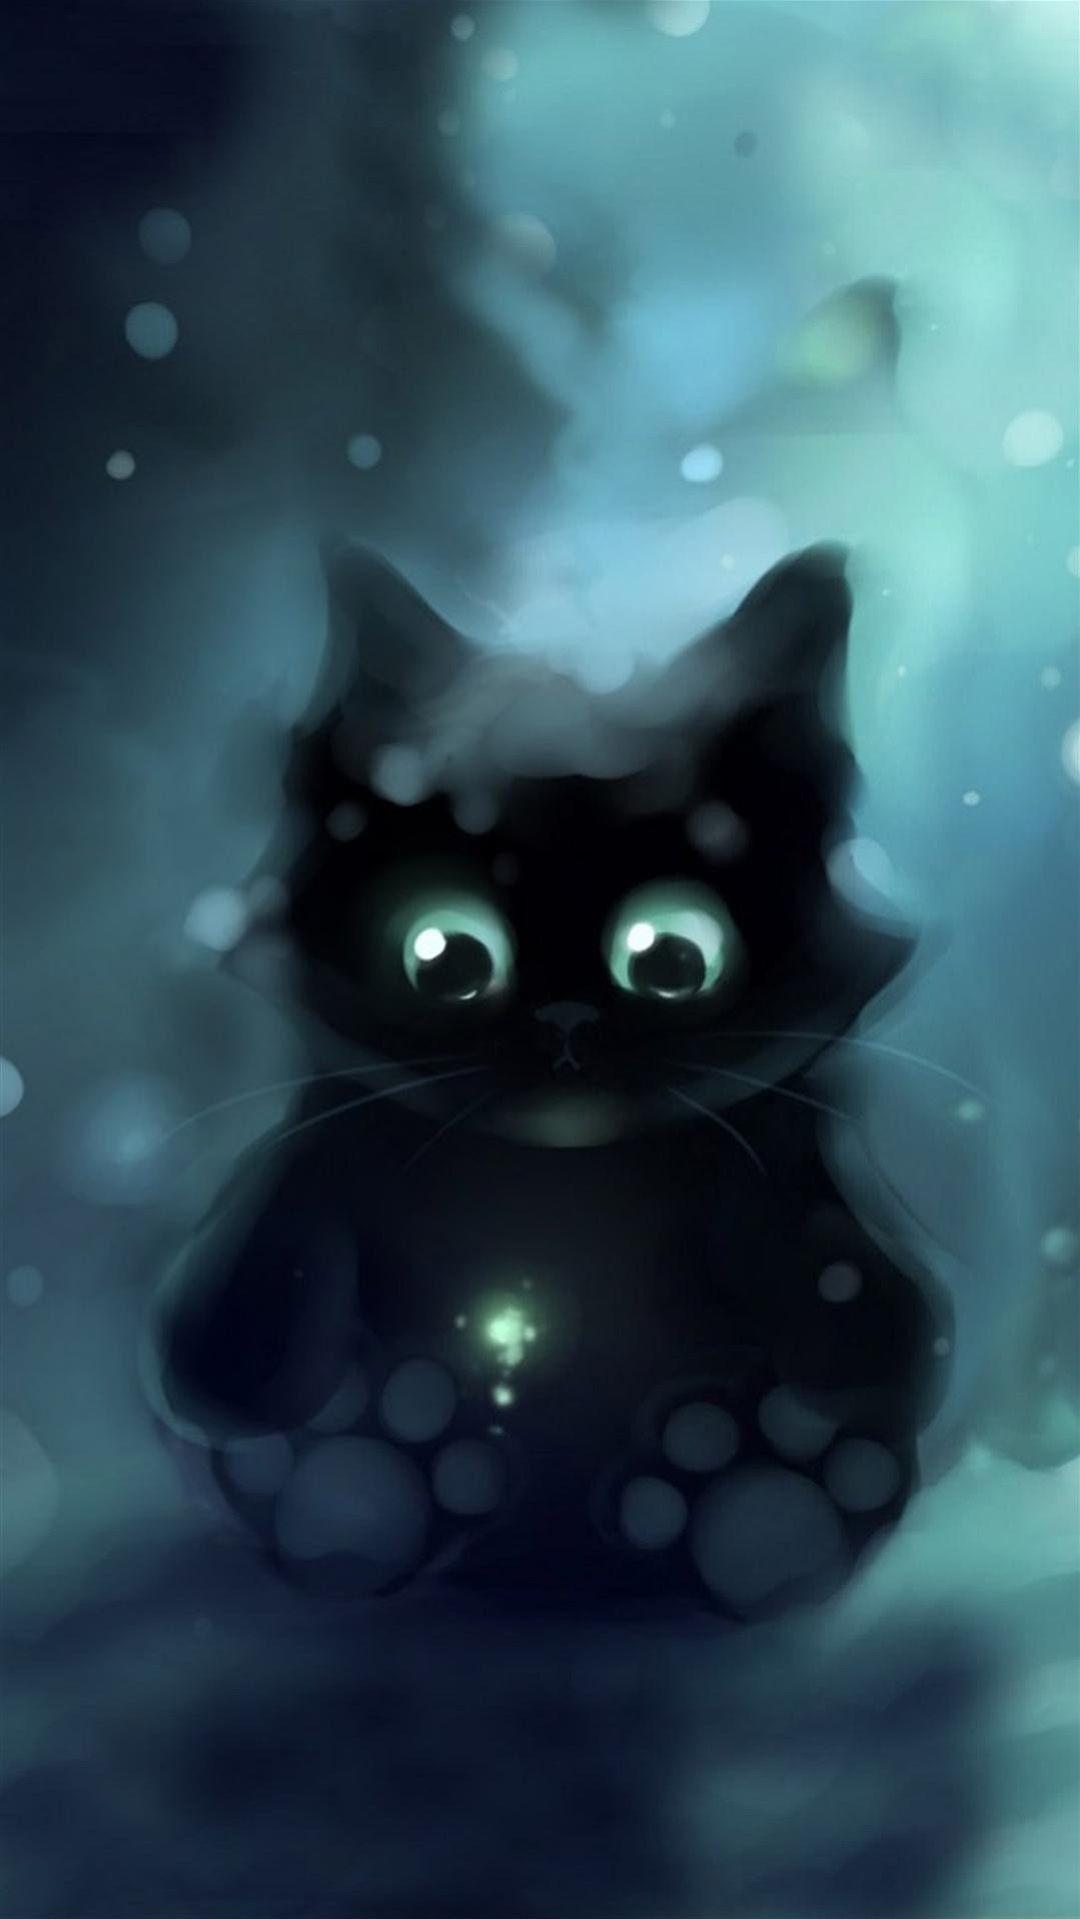 Black Cat Galaxy Wallpaper On For Your